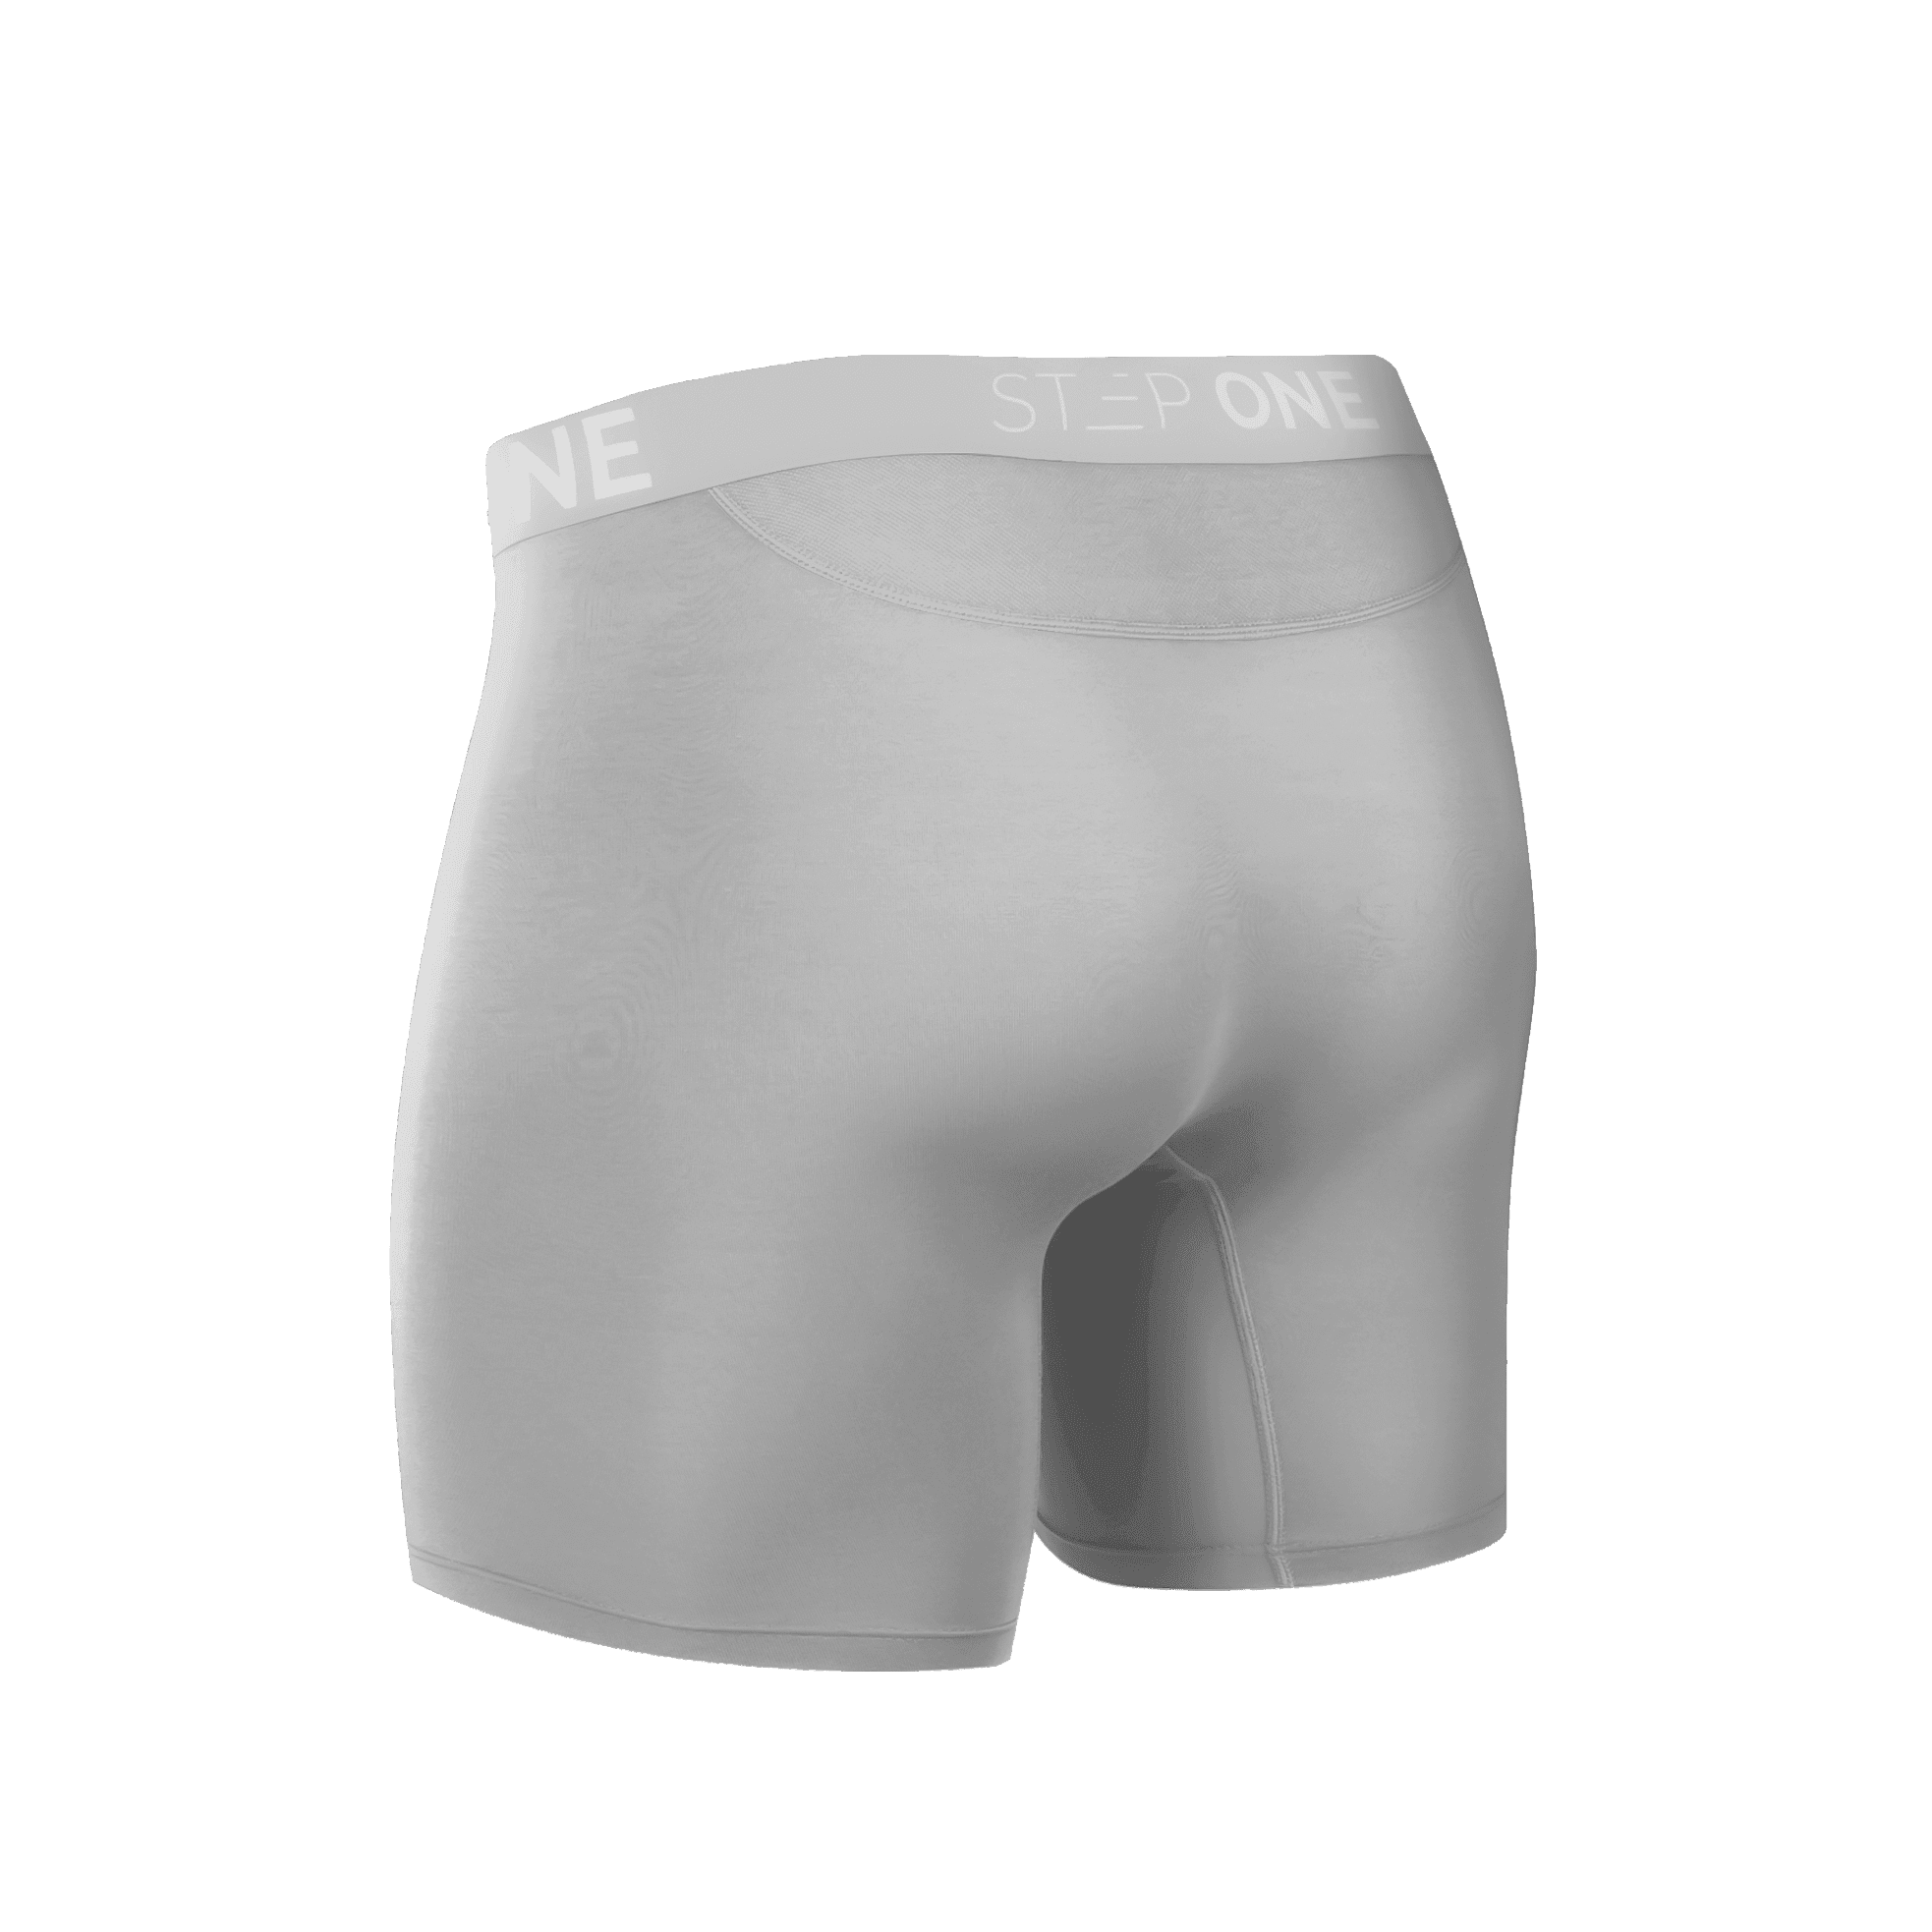 Boxer Brief Fly - Tin Cans